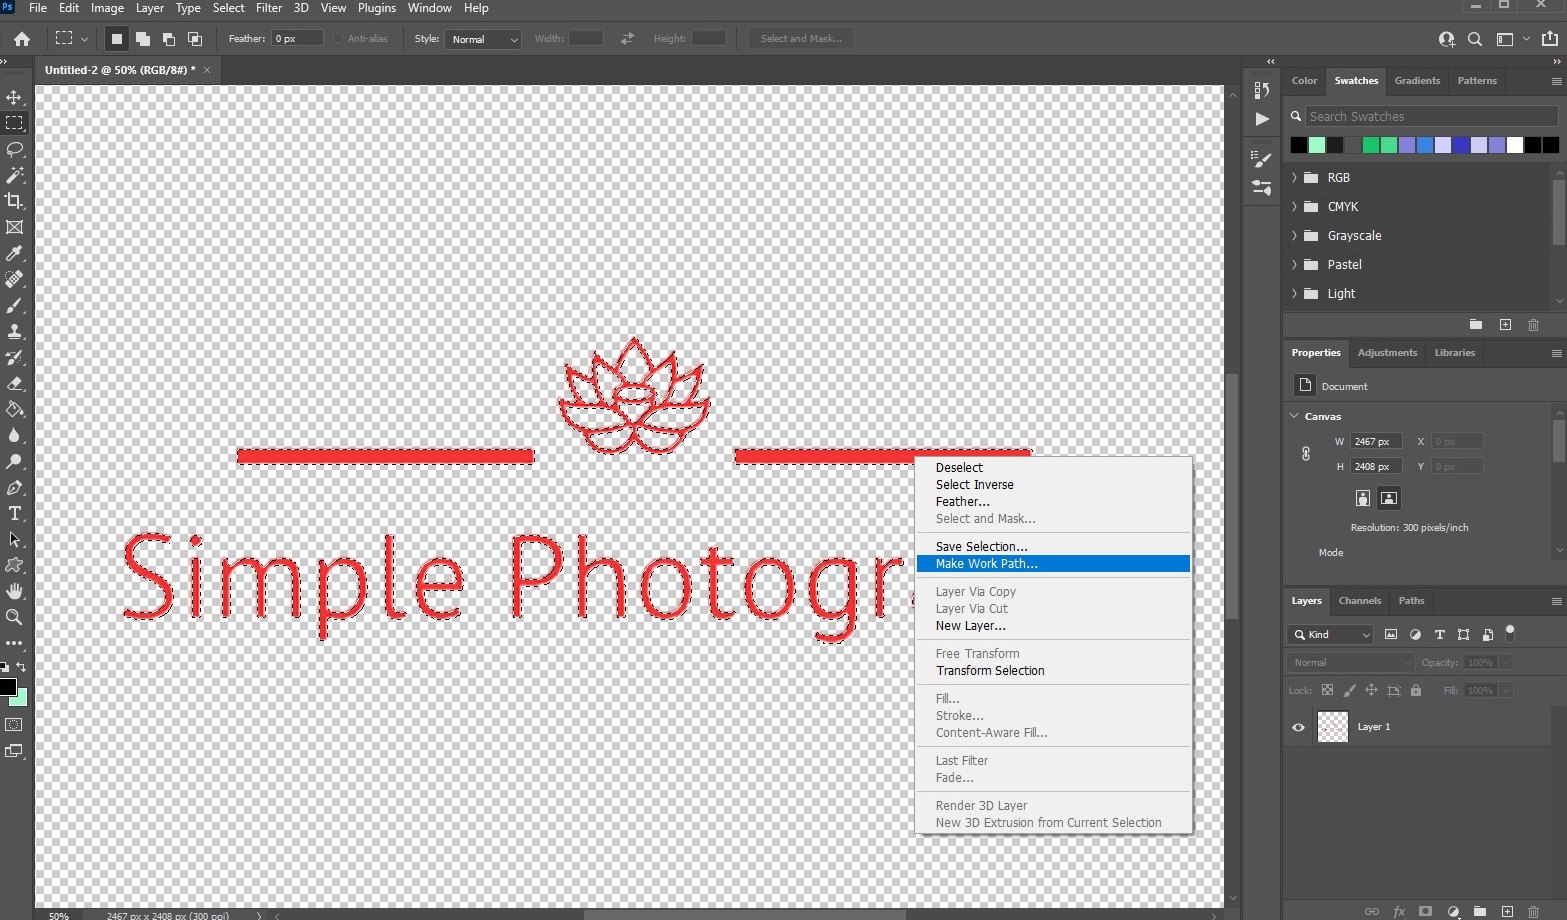 vectorize image in photoshop - 2